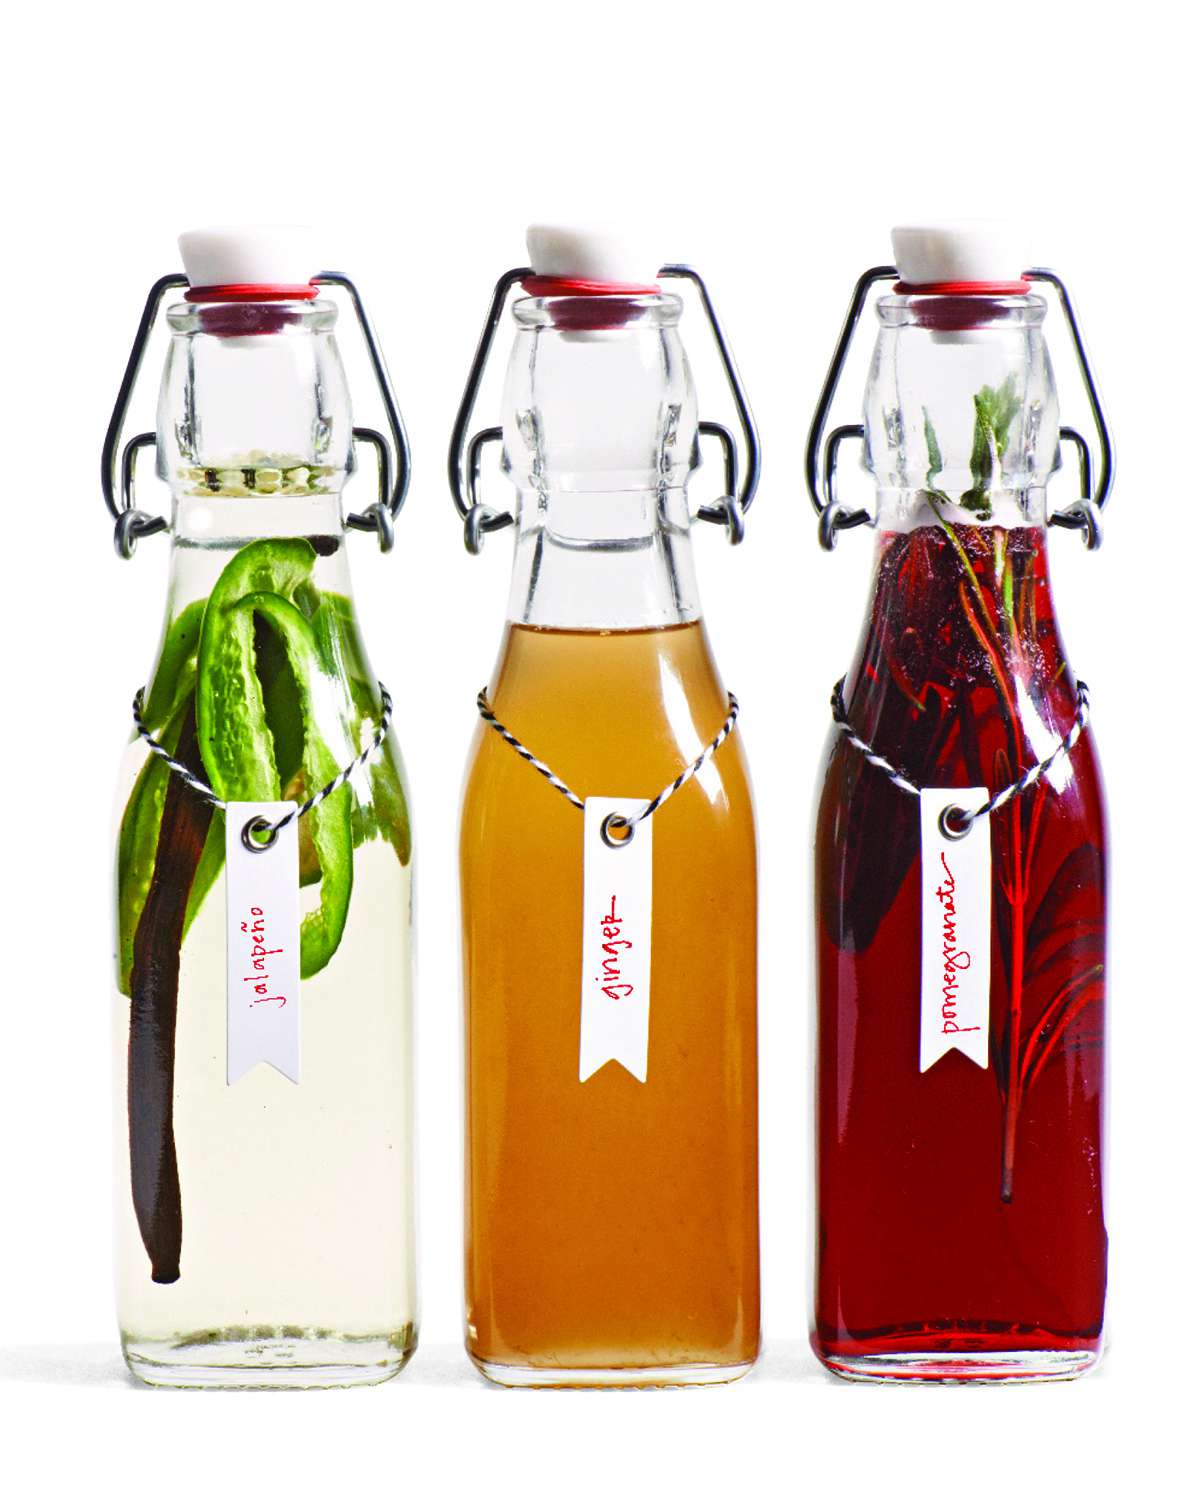 Flavored Syrups